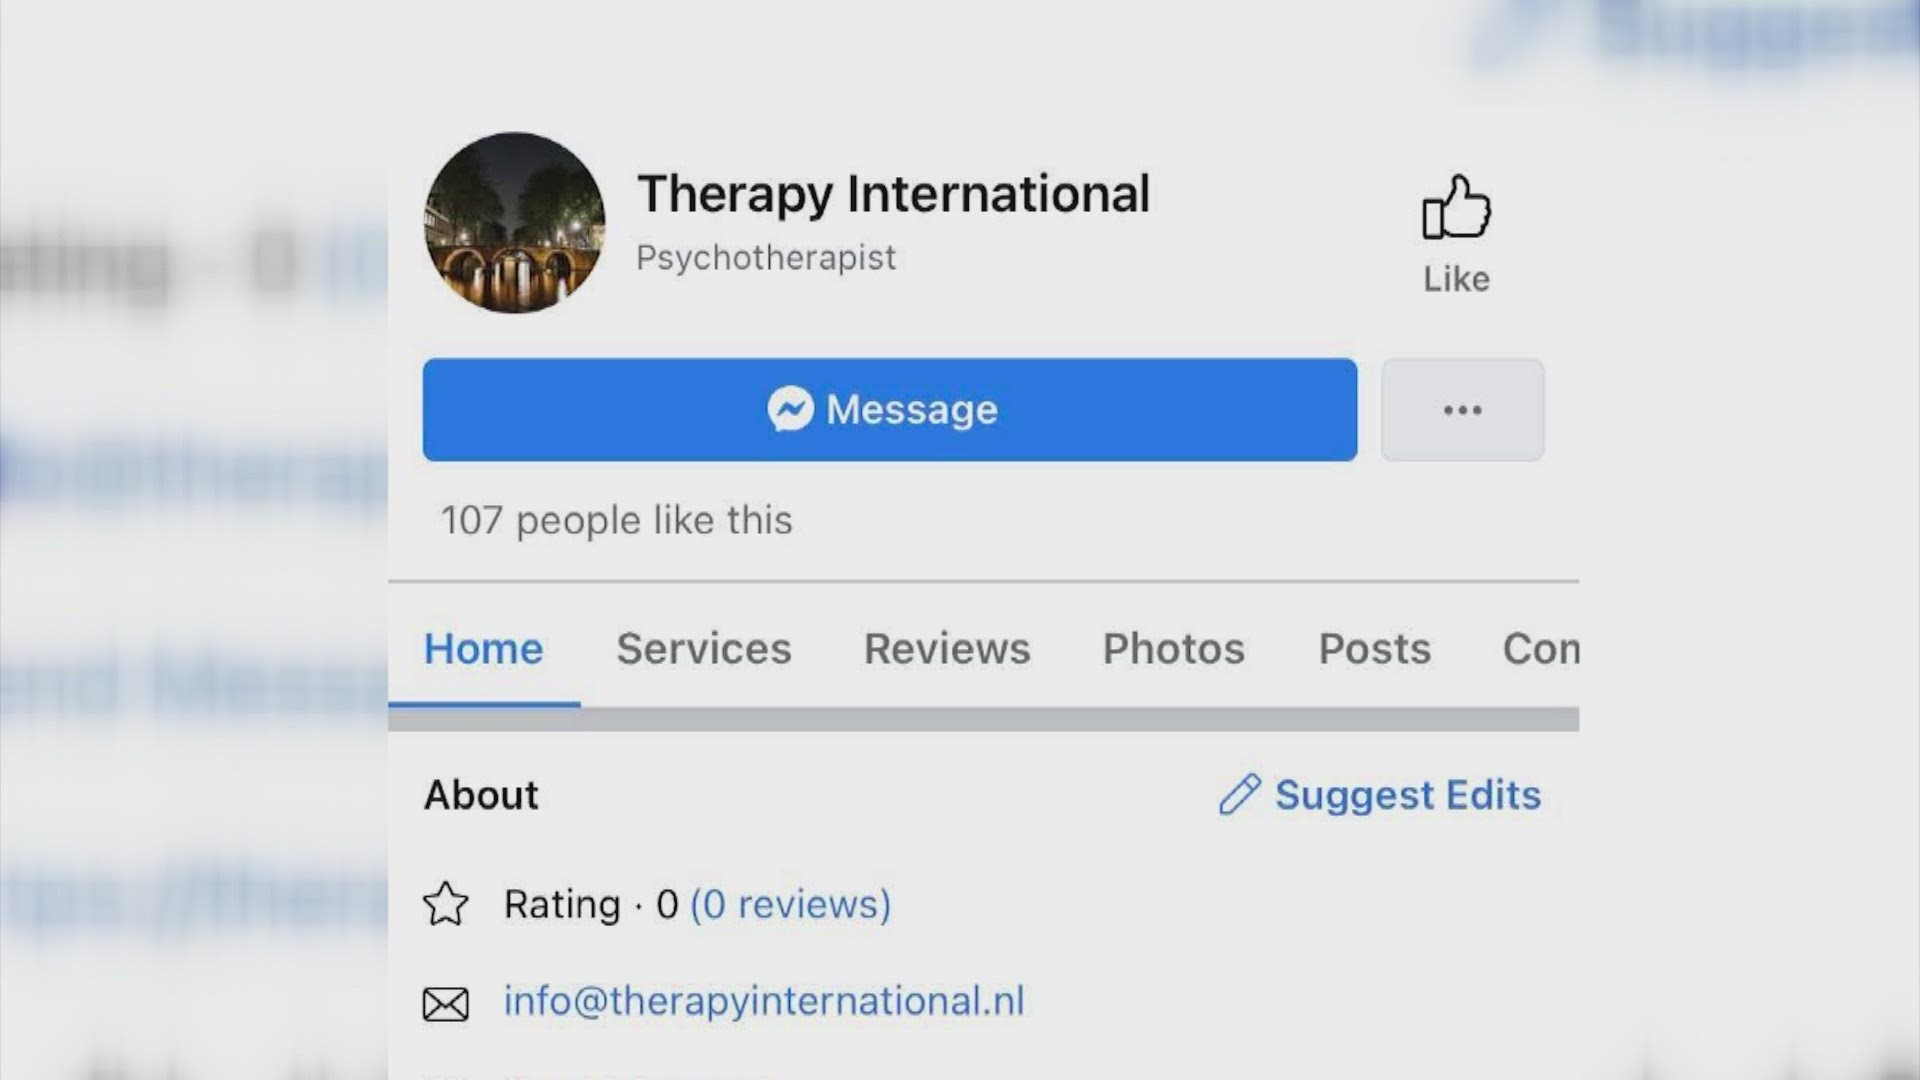 The owner of Therapy International says frontline workers can message them on Facebook to learn more.